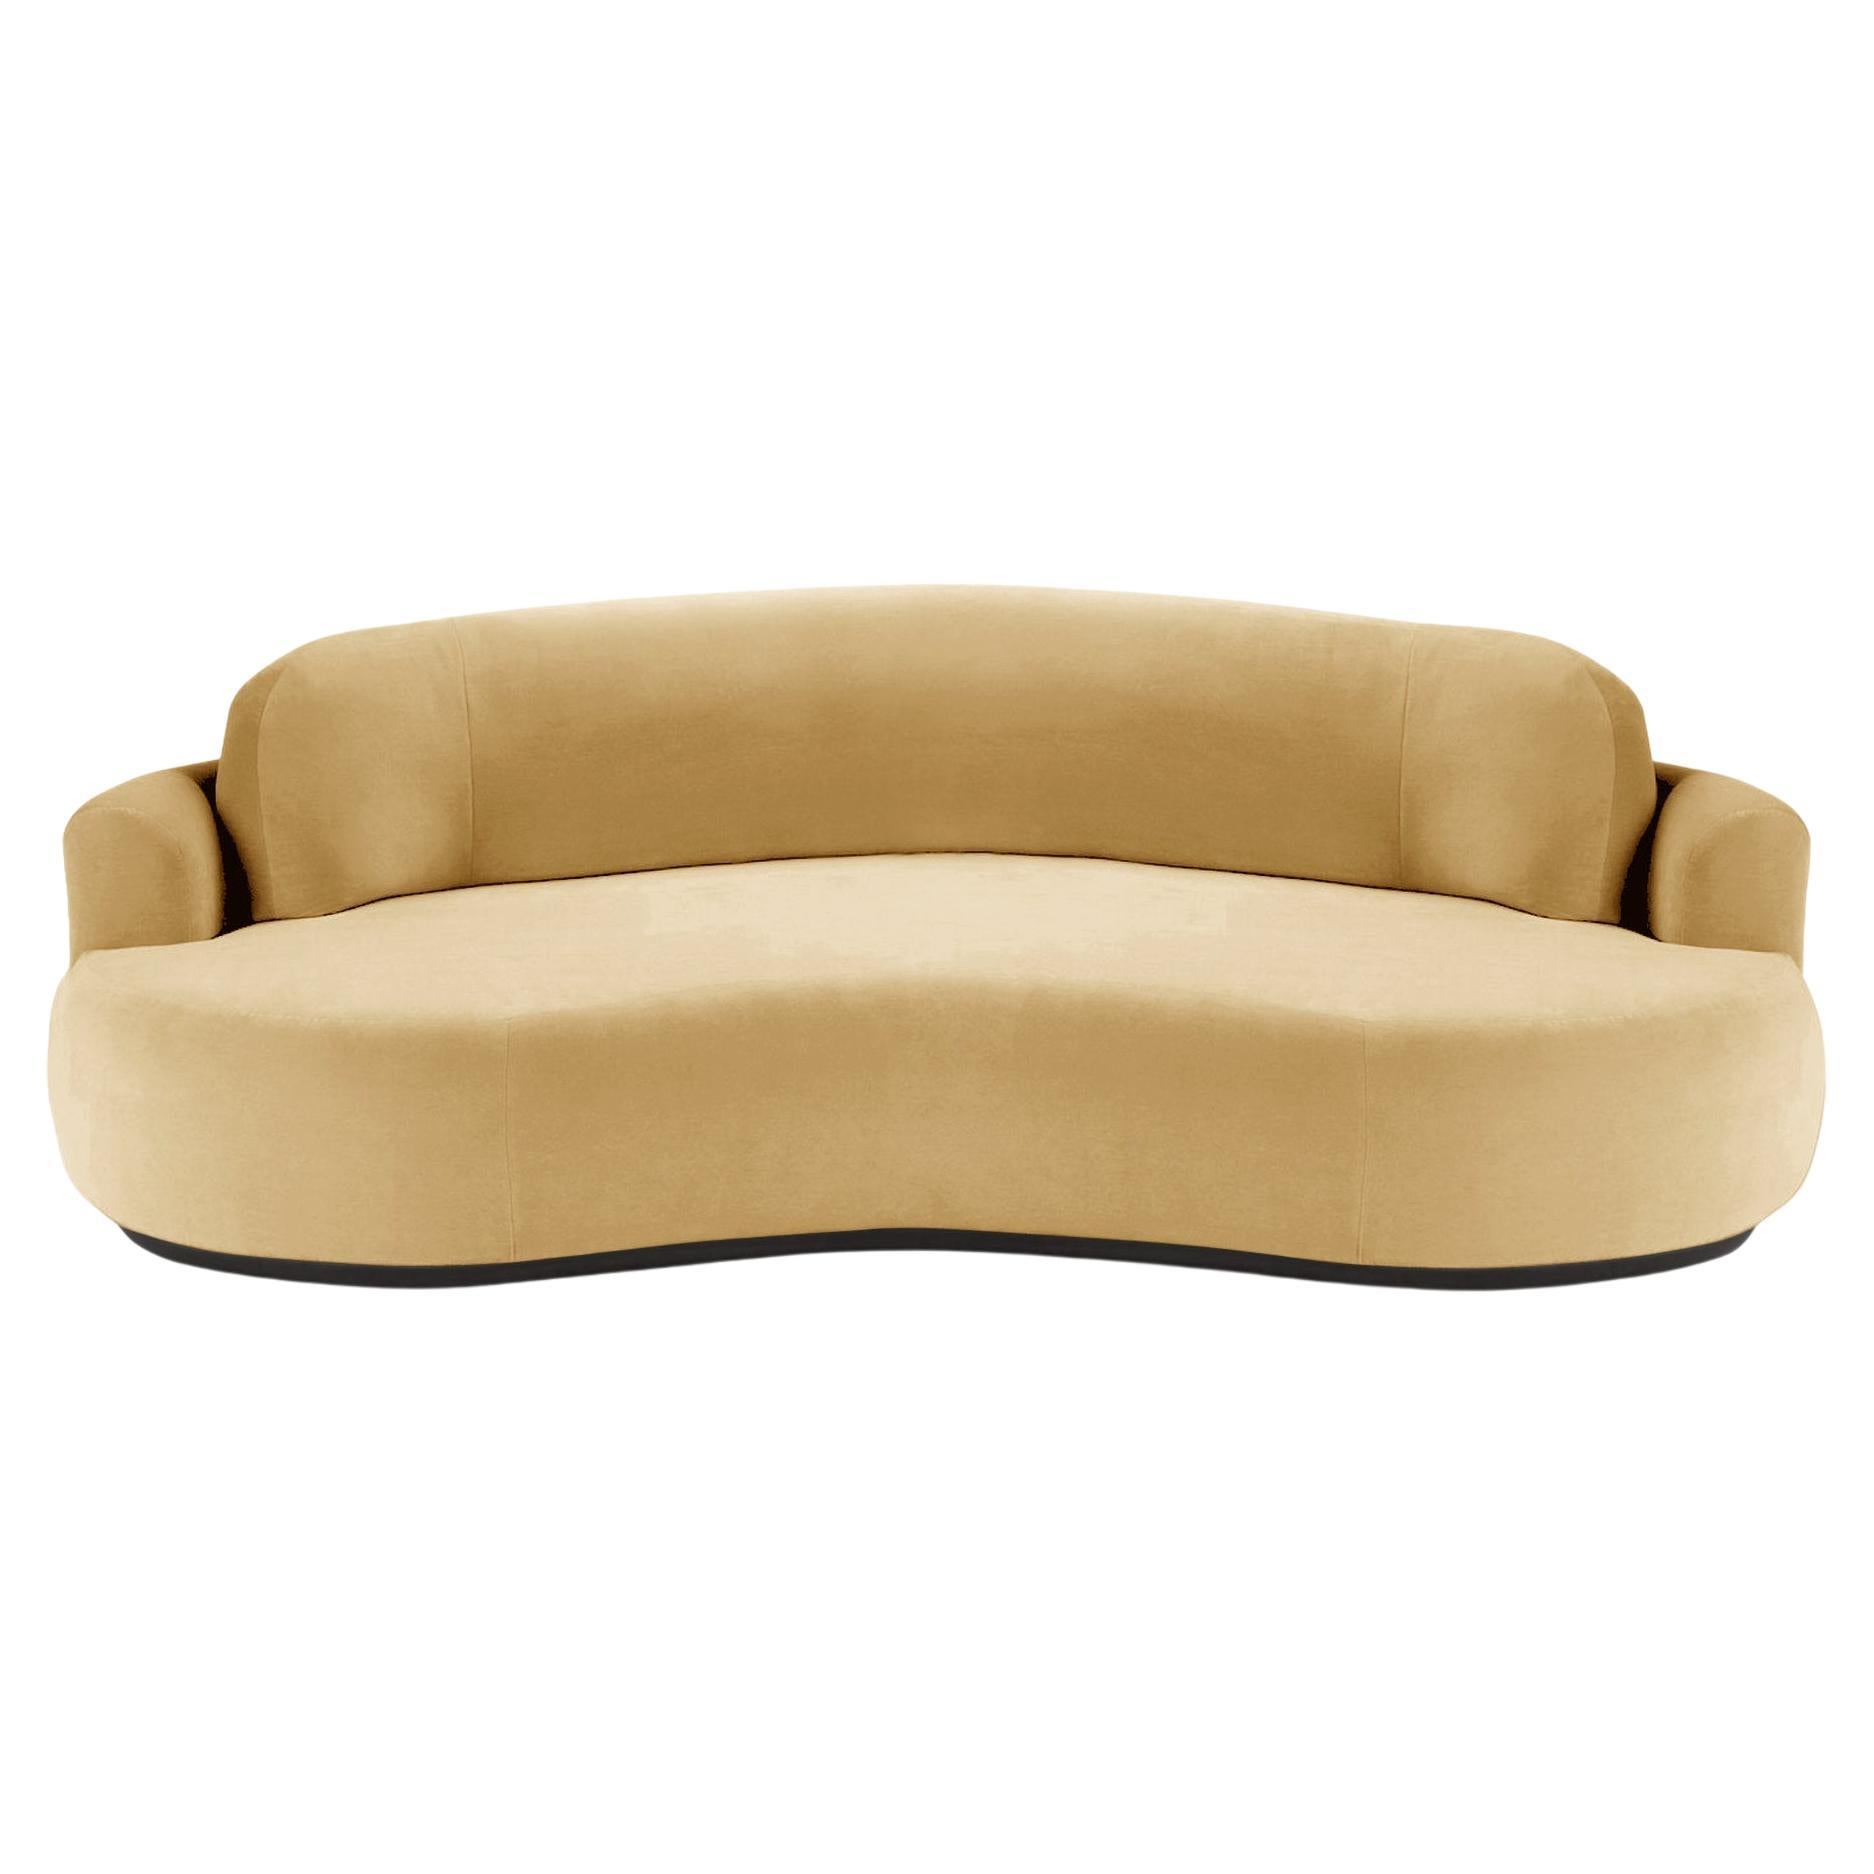 Naked Round Sofa, Large with Beech Ash-056-5 and Vigo Plantain For Sale